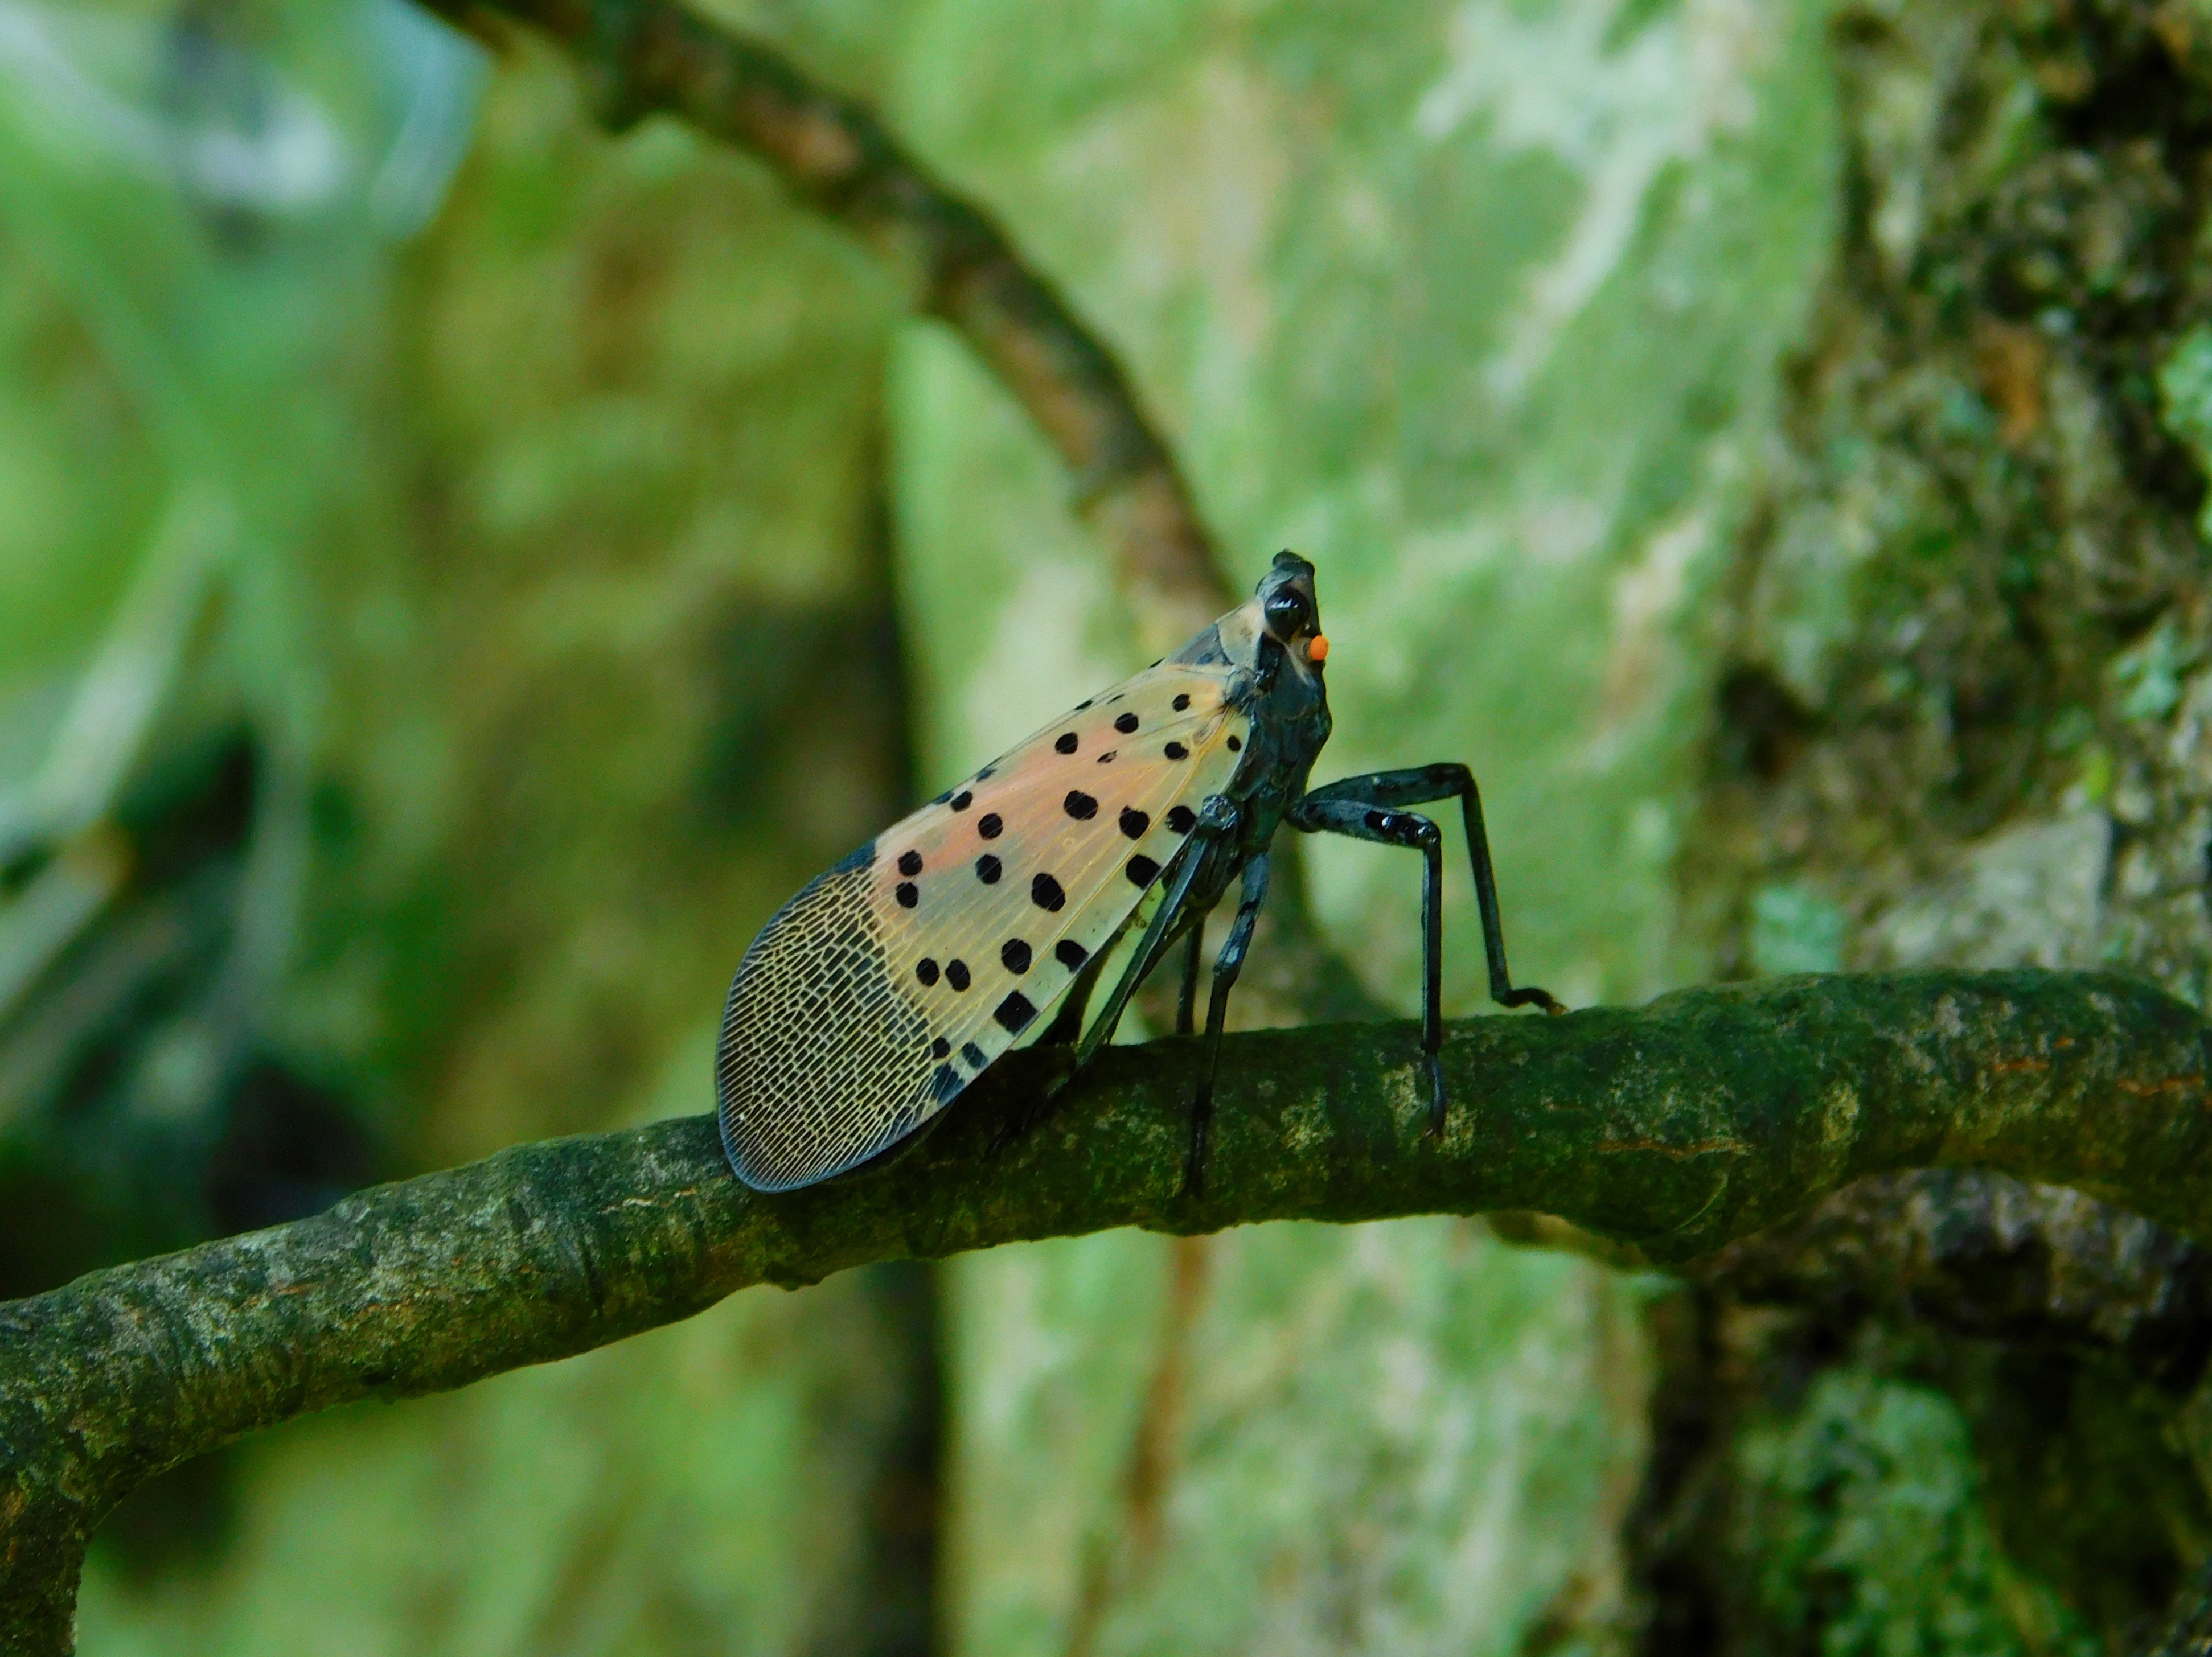 spotted lantern fly insecticide